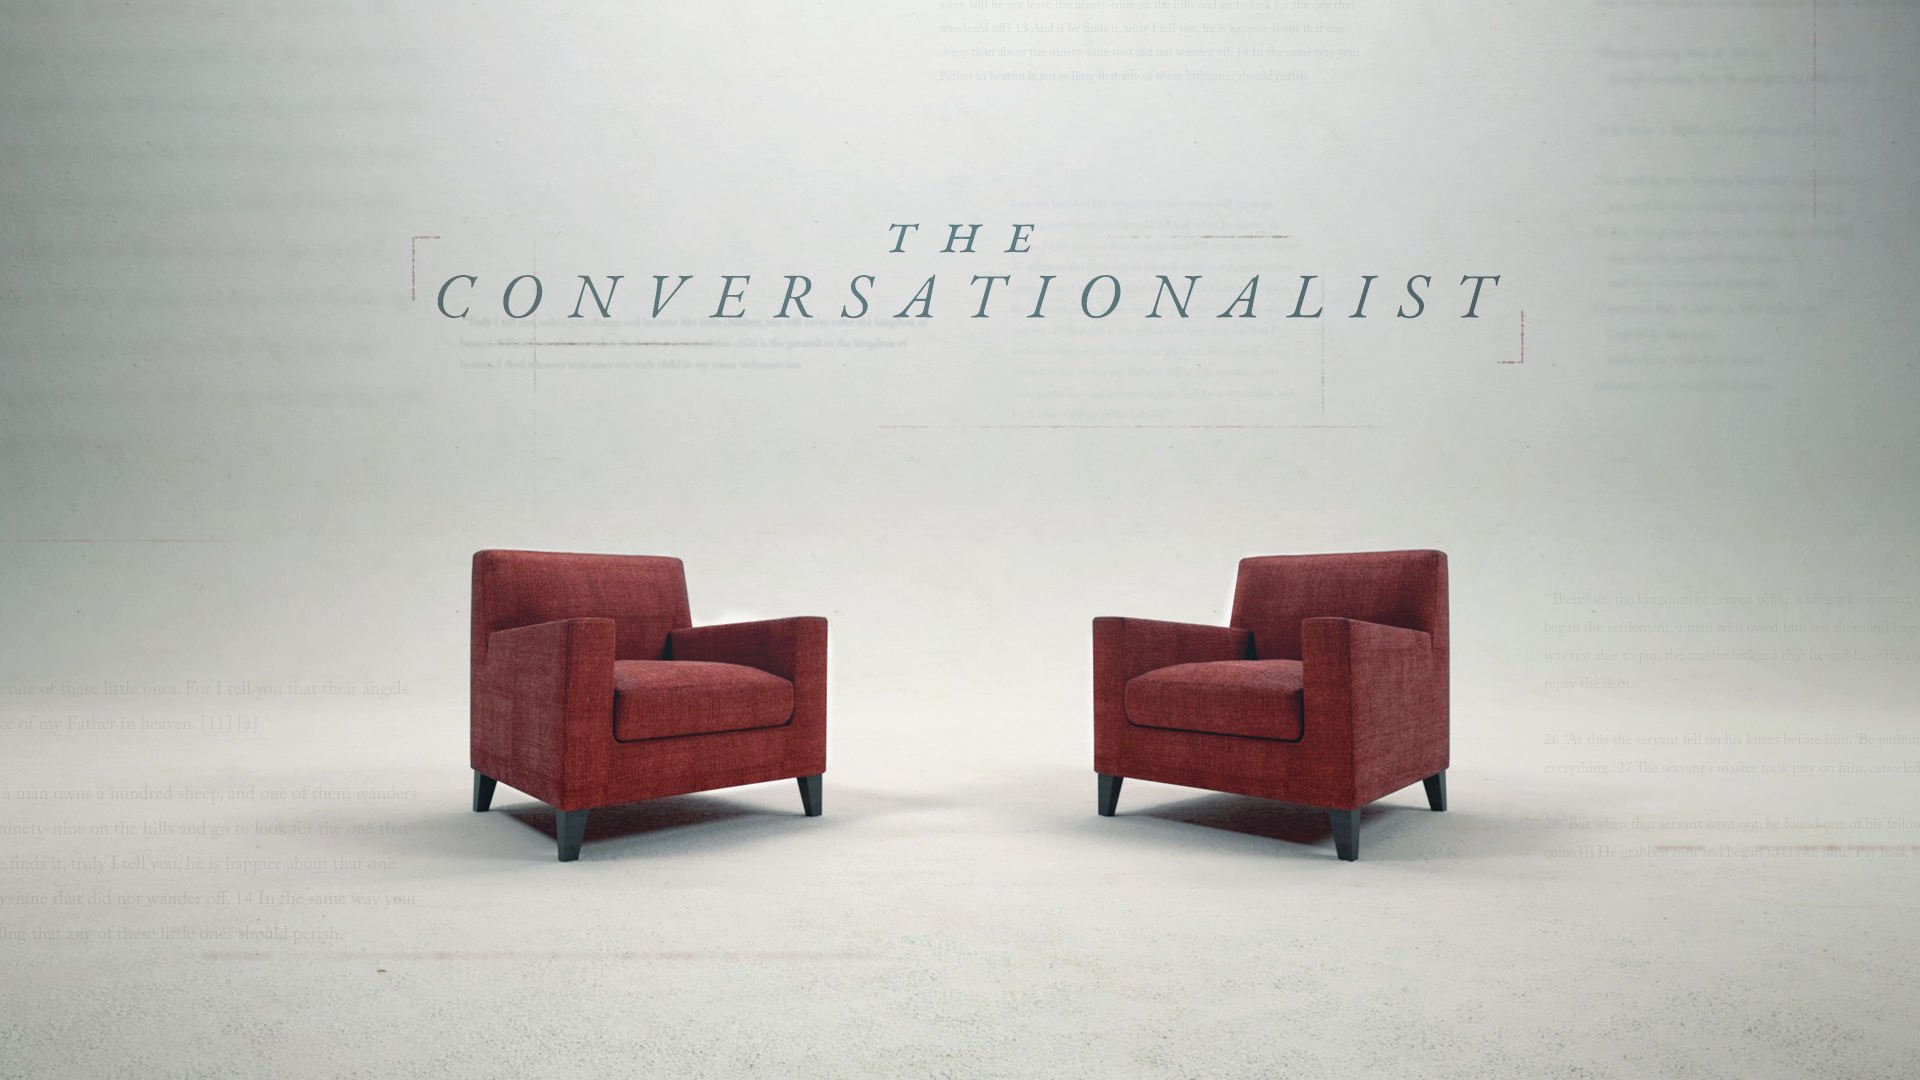 The Conversationalist: Learning to Hear